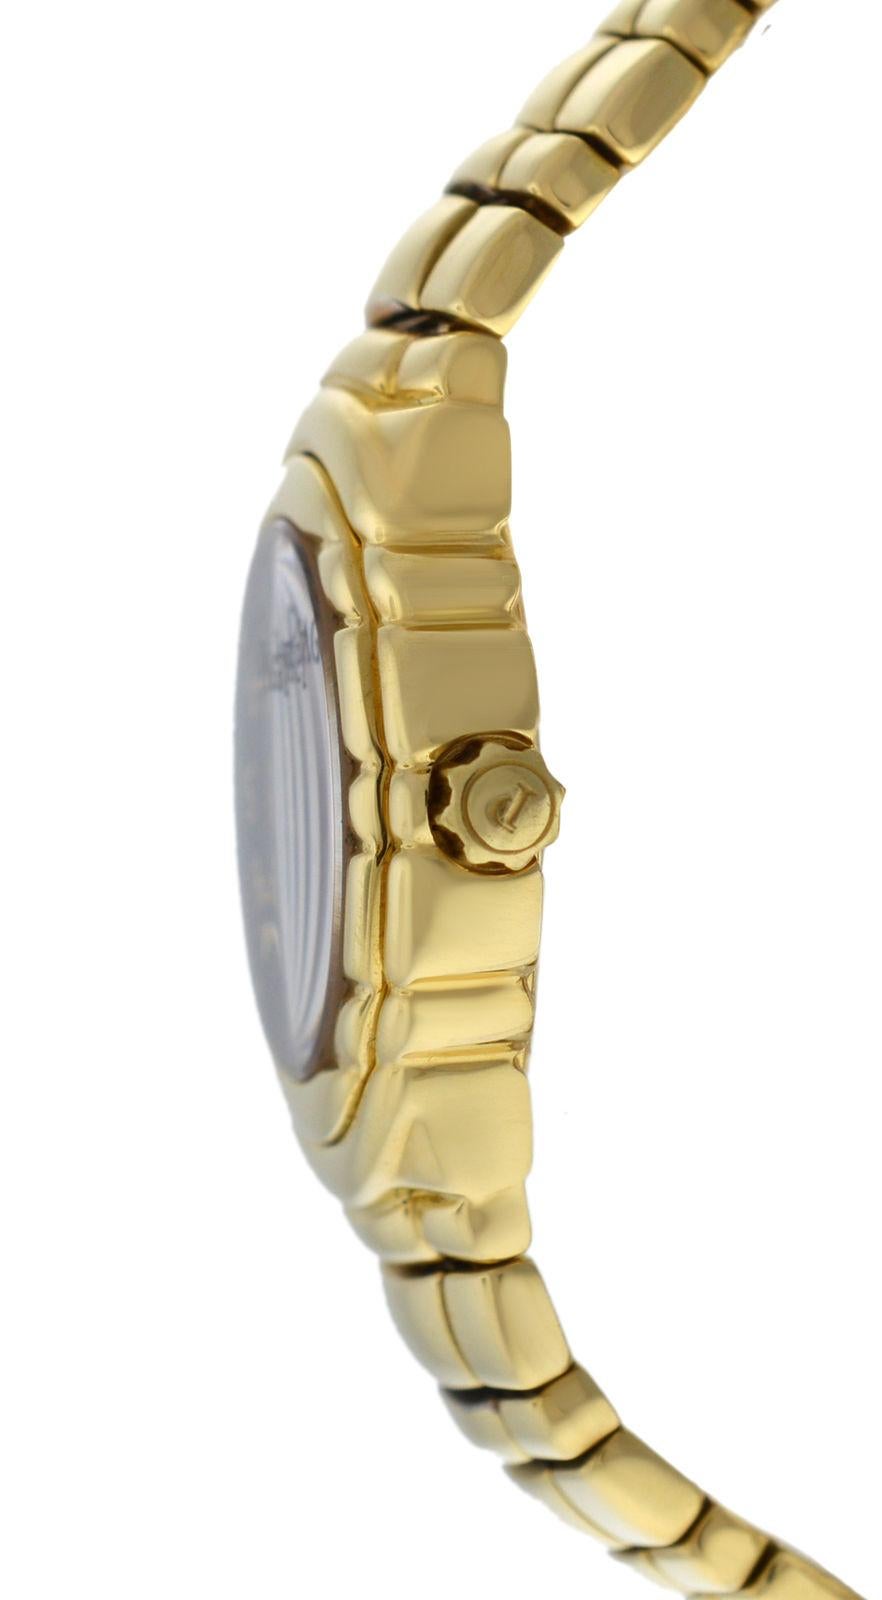 Brand	Piaget
Model	Tanagra 16031.M.401.D or 16031 M 401 D
Gender	Ladies
Condition	Pre-owned
Movement	Swiss quartz
Case Material	18K Yellow Gold
Bracelet / Strap Material	
18K Yellow Gold

Clasp / Buckle Material	
18K Rose Gold

Clasp Type	Butterfly